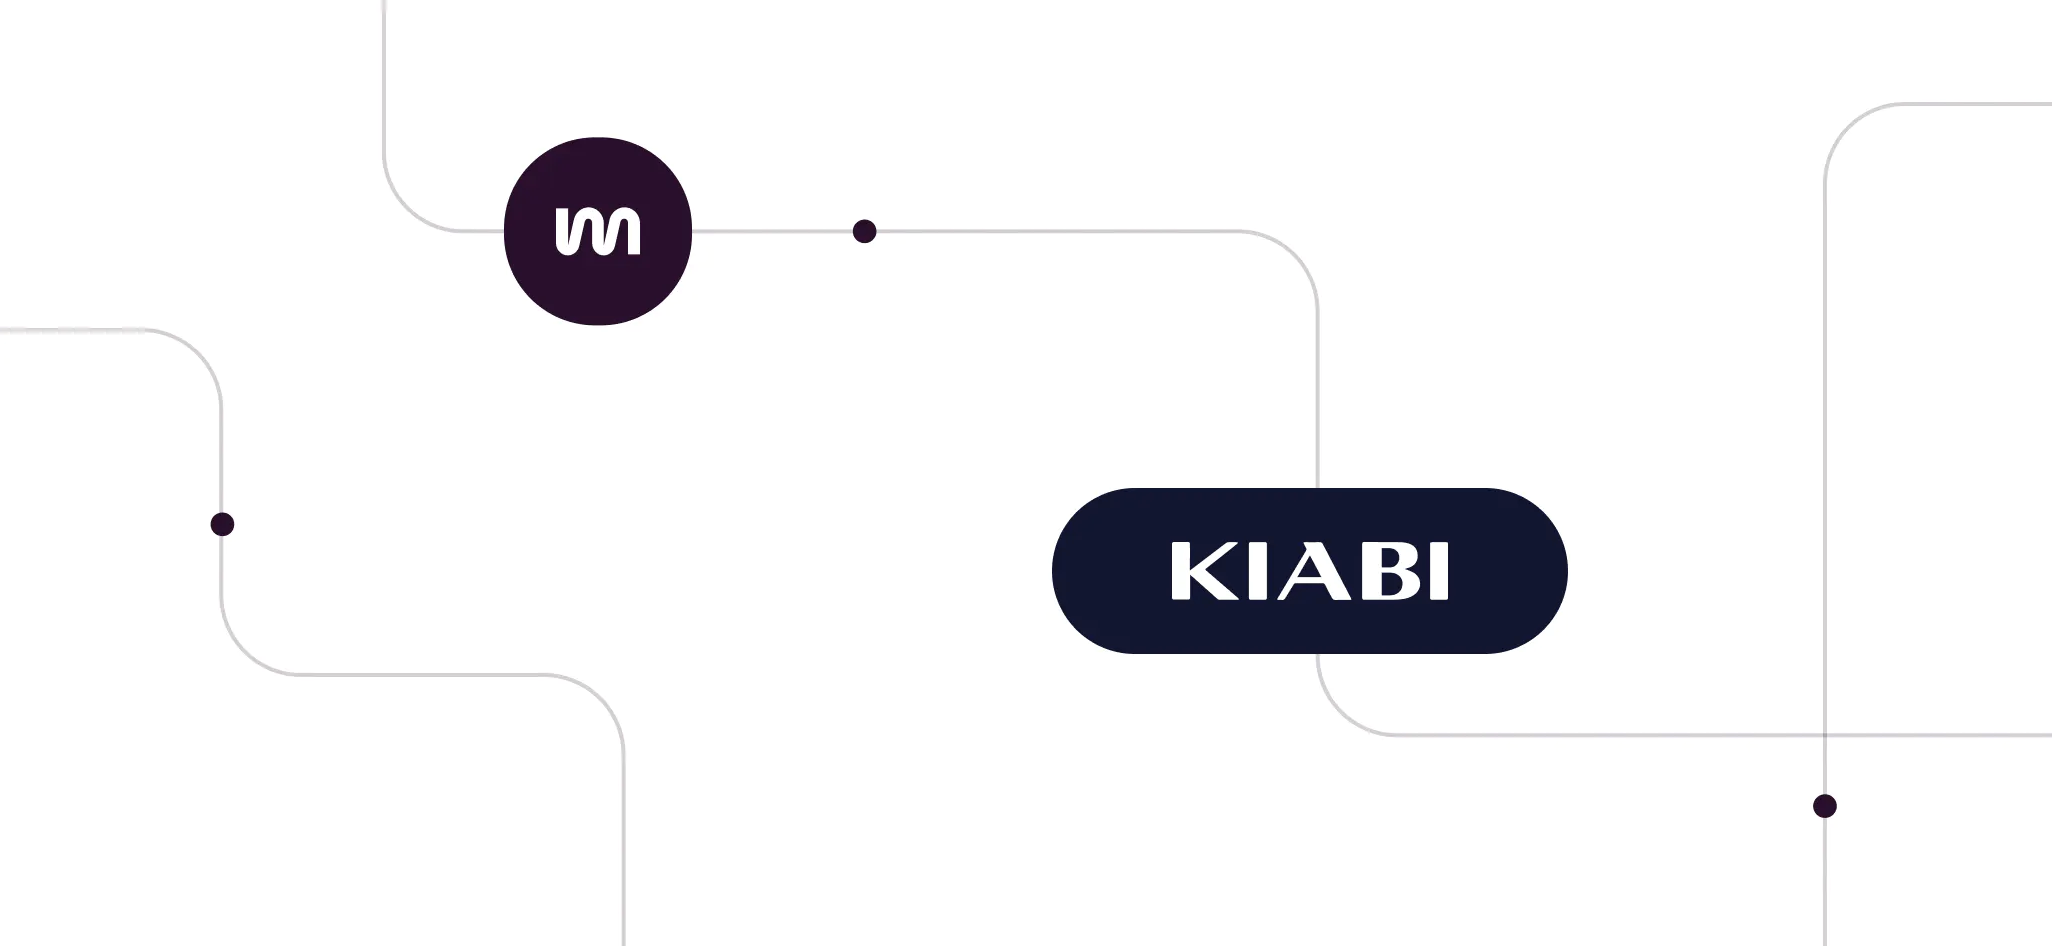 Mangopay and Kiabi collaborate to provide secure payment infrastructure.